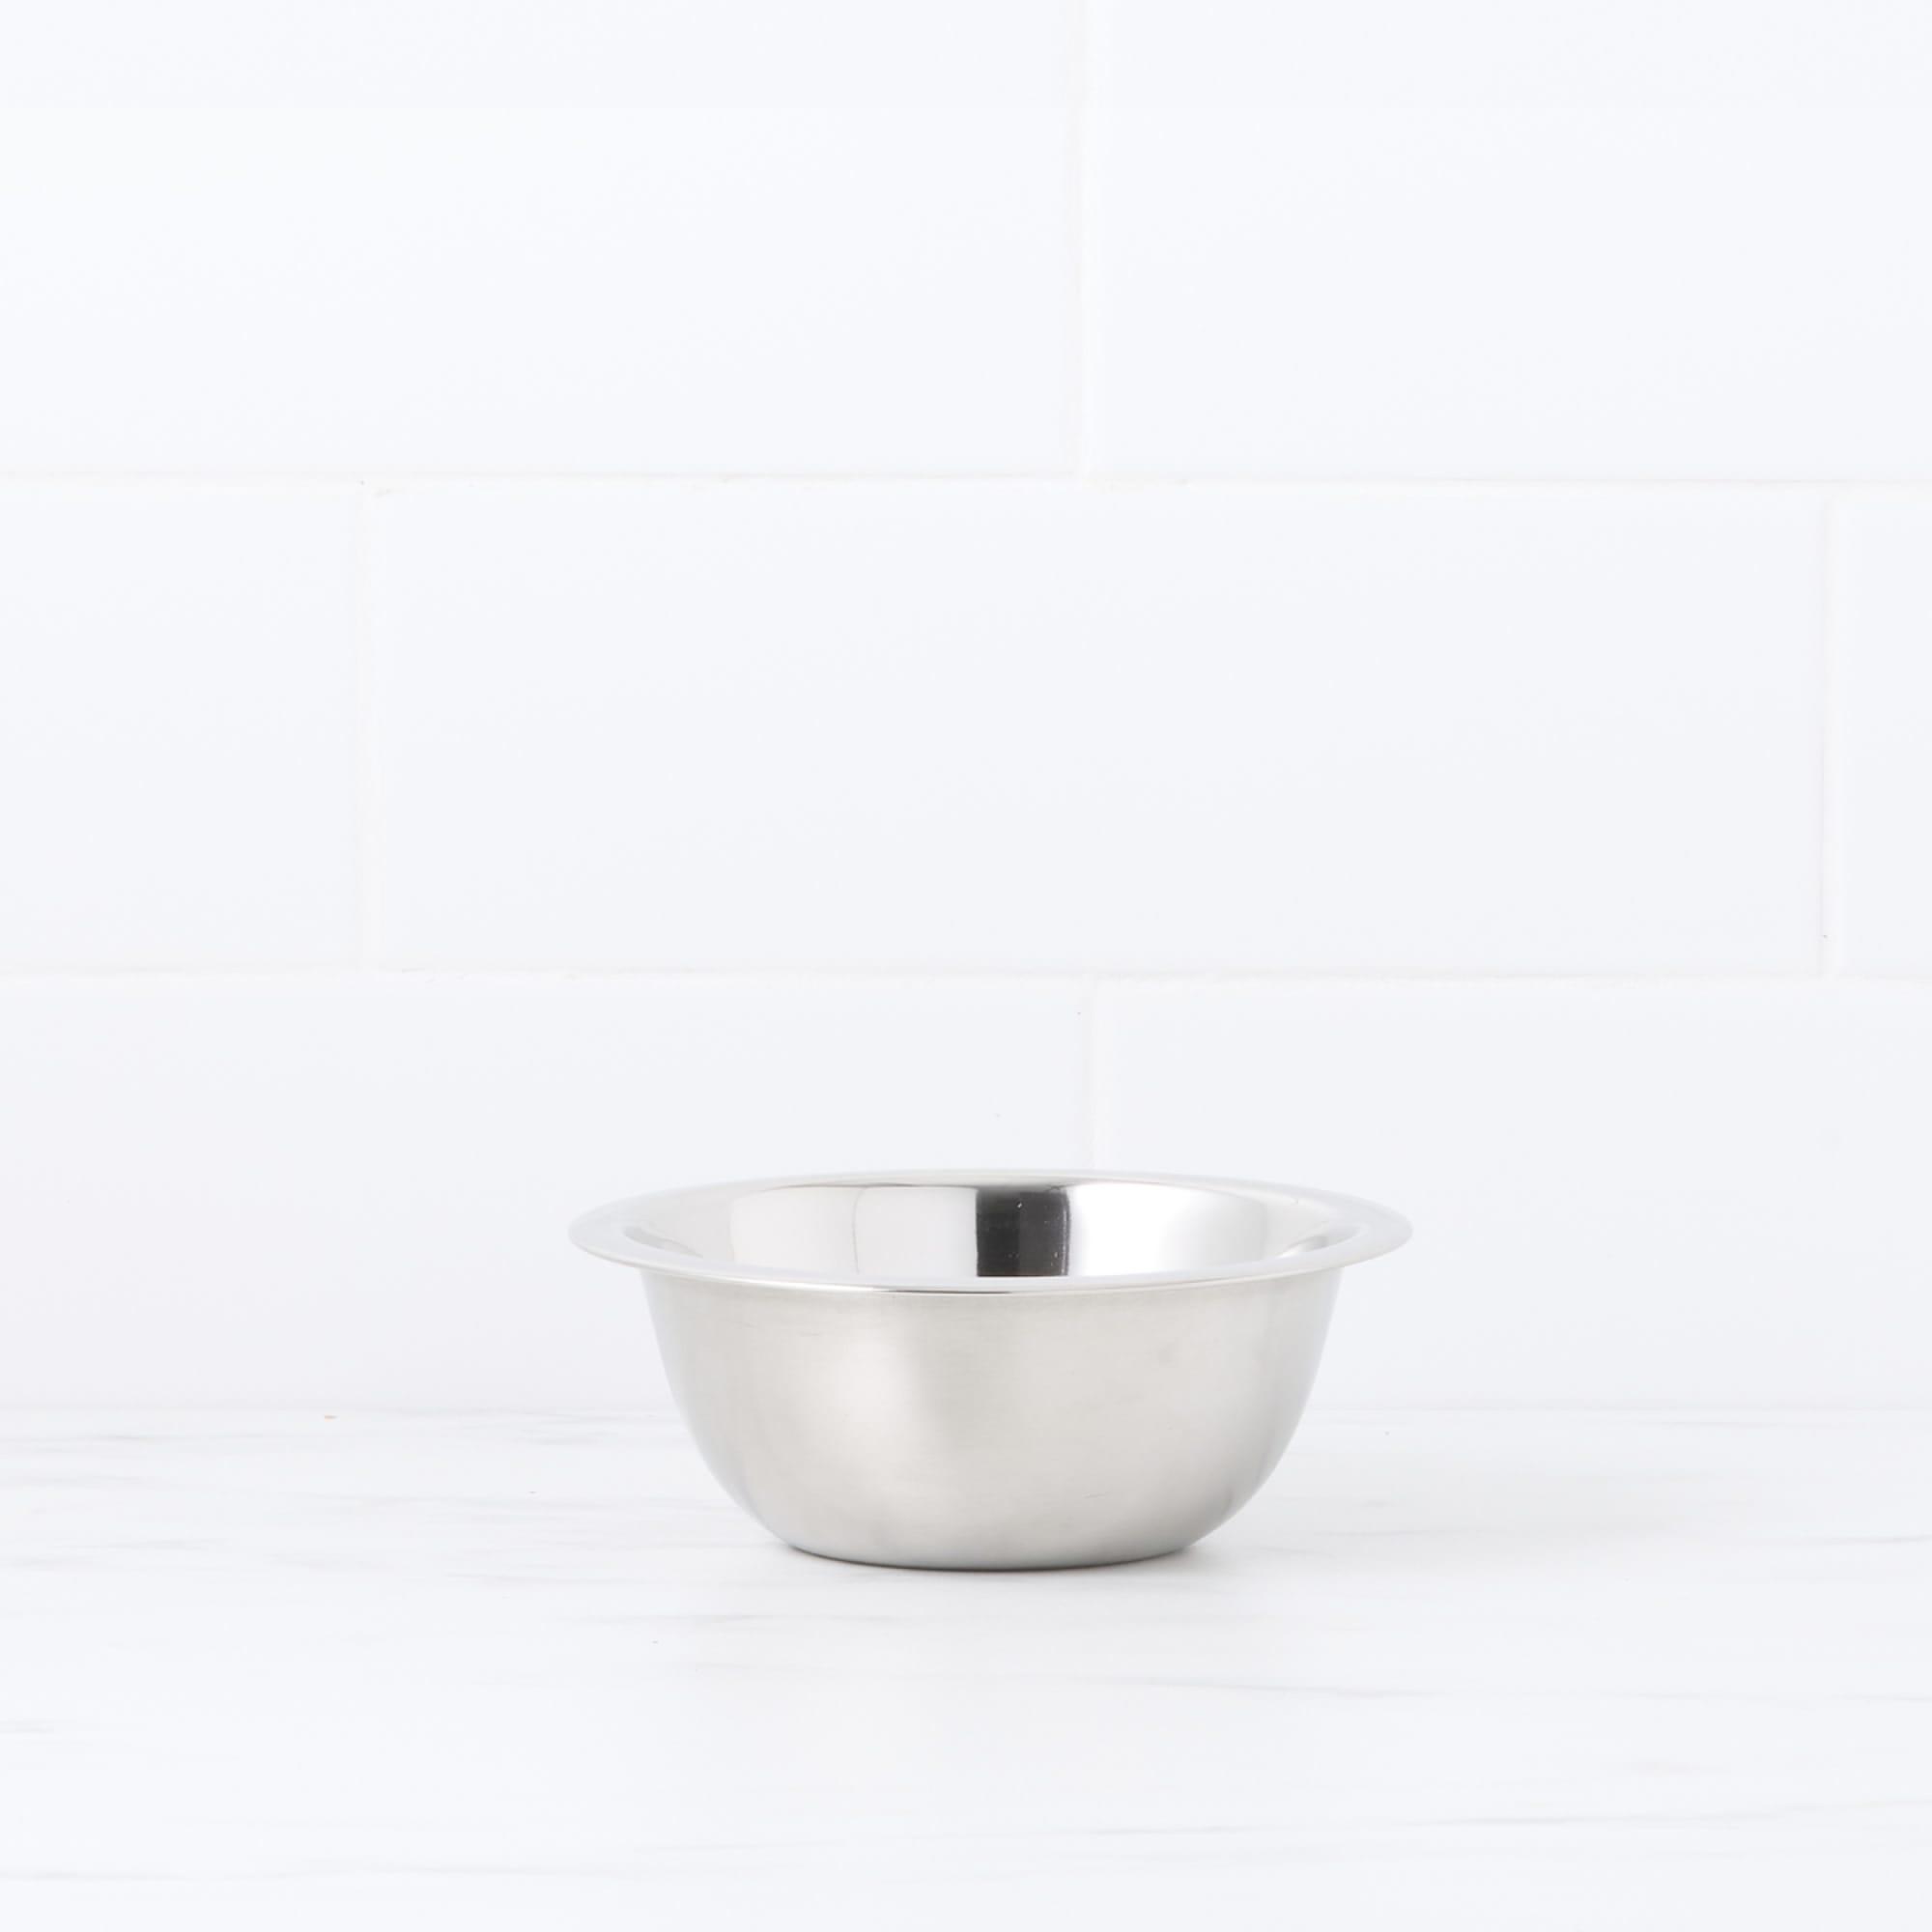 Kitchen Pro Mixwell Stainless Steel Mixing Bowl 16cm - 900ml Image 1